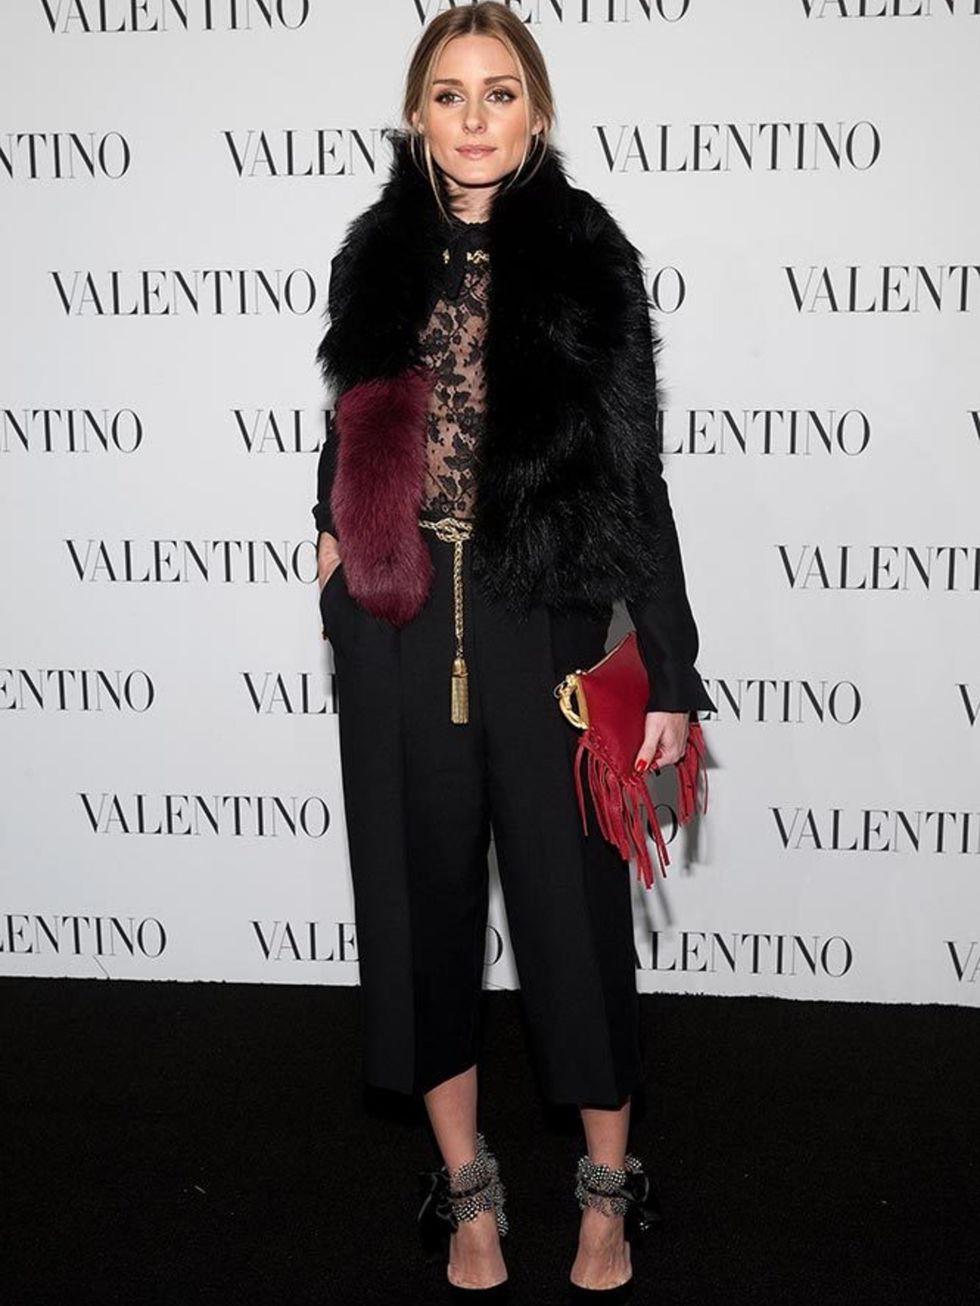 Olivia Palermo at the Valentino Sala Bianca 945 Event in New York, December 2014.